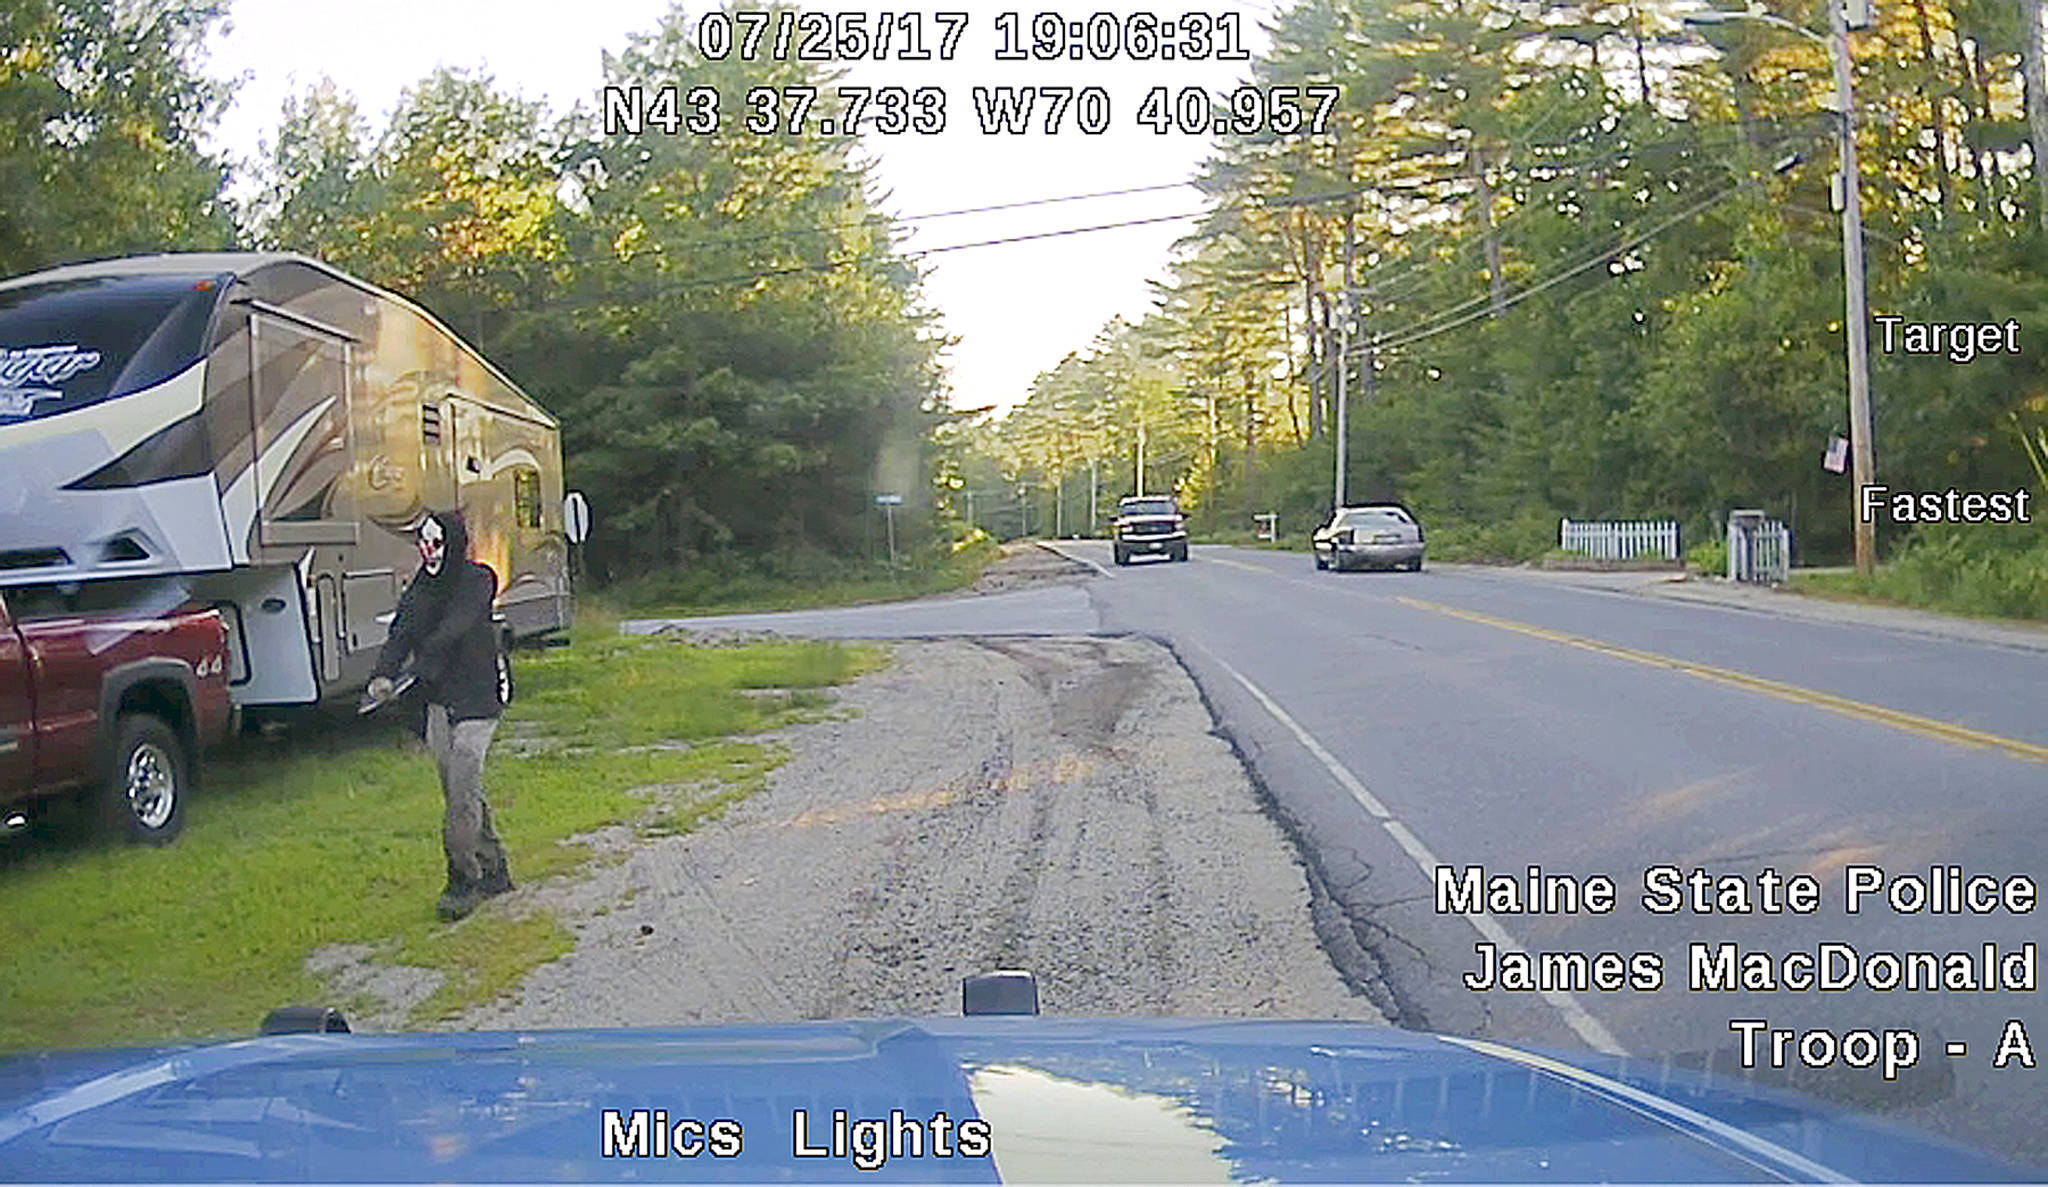 This dashboard camera image released by the Maine State Police shows a man strolling down a street in Hollis, Maine. Police said he was wearing a clown mask with a machete taped to his amputated arm. (Maine State Police via AP)